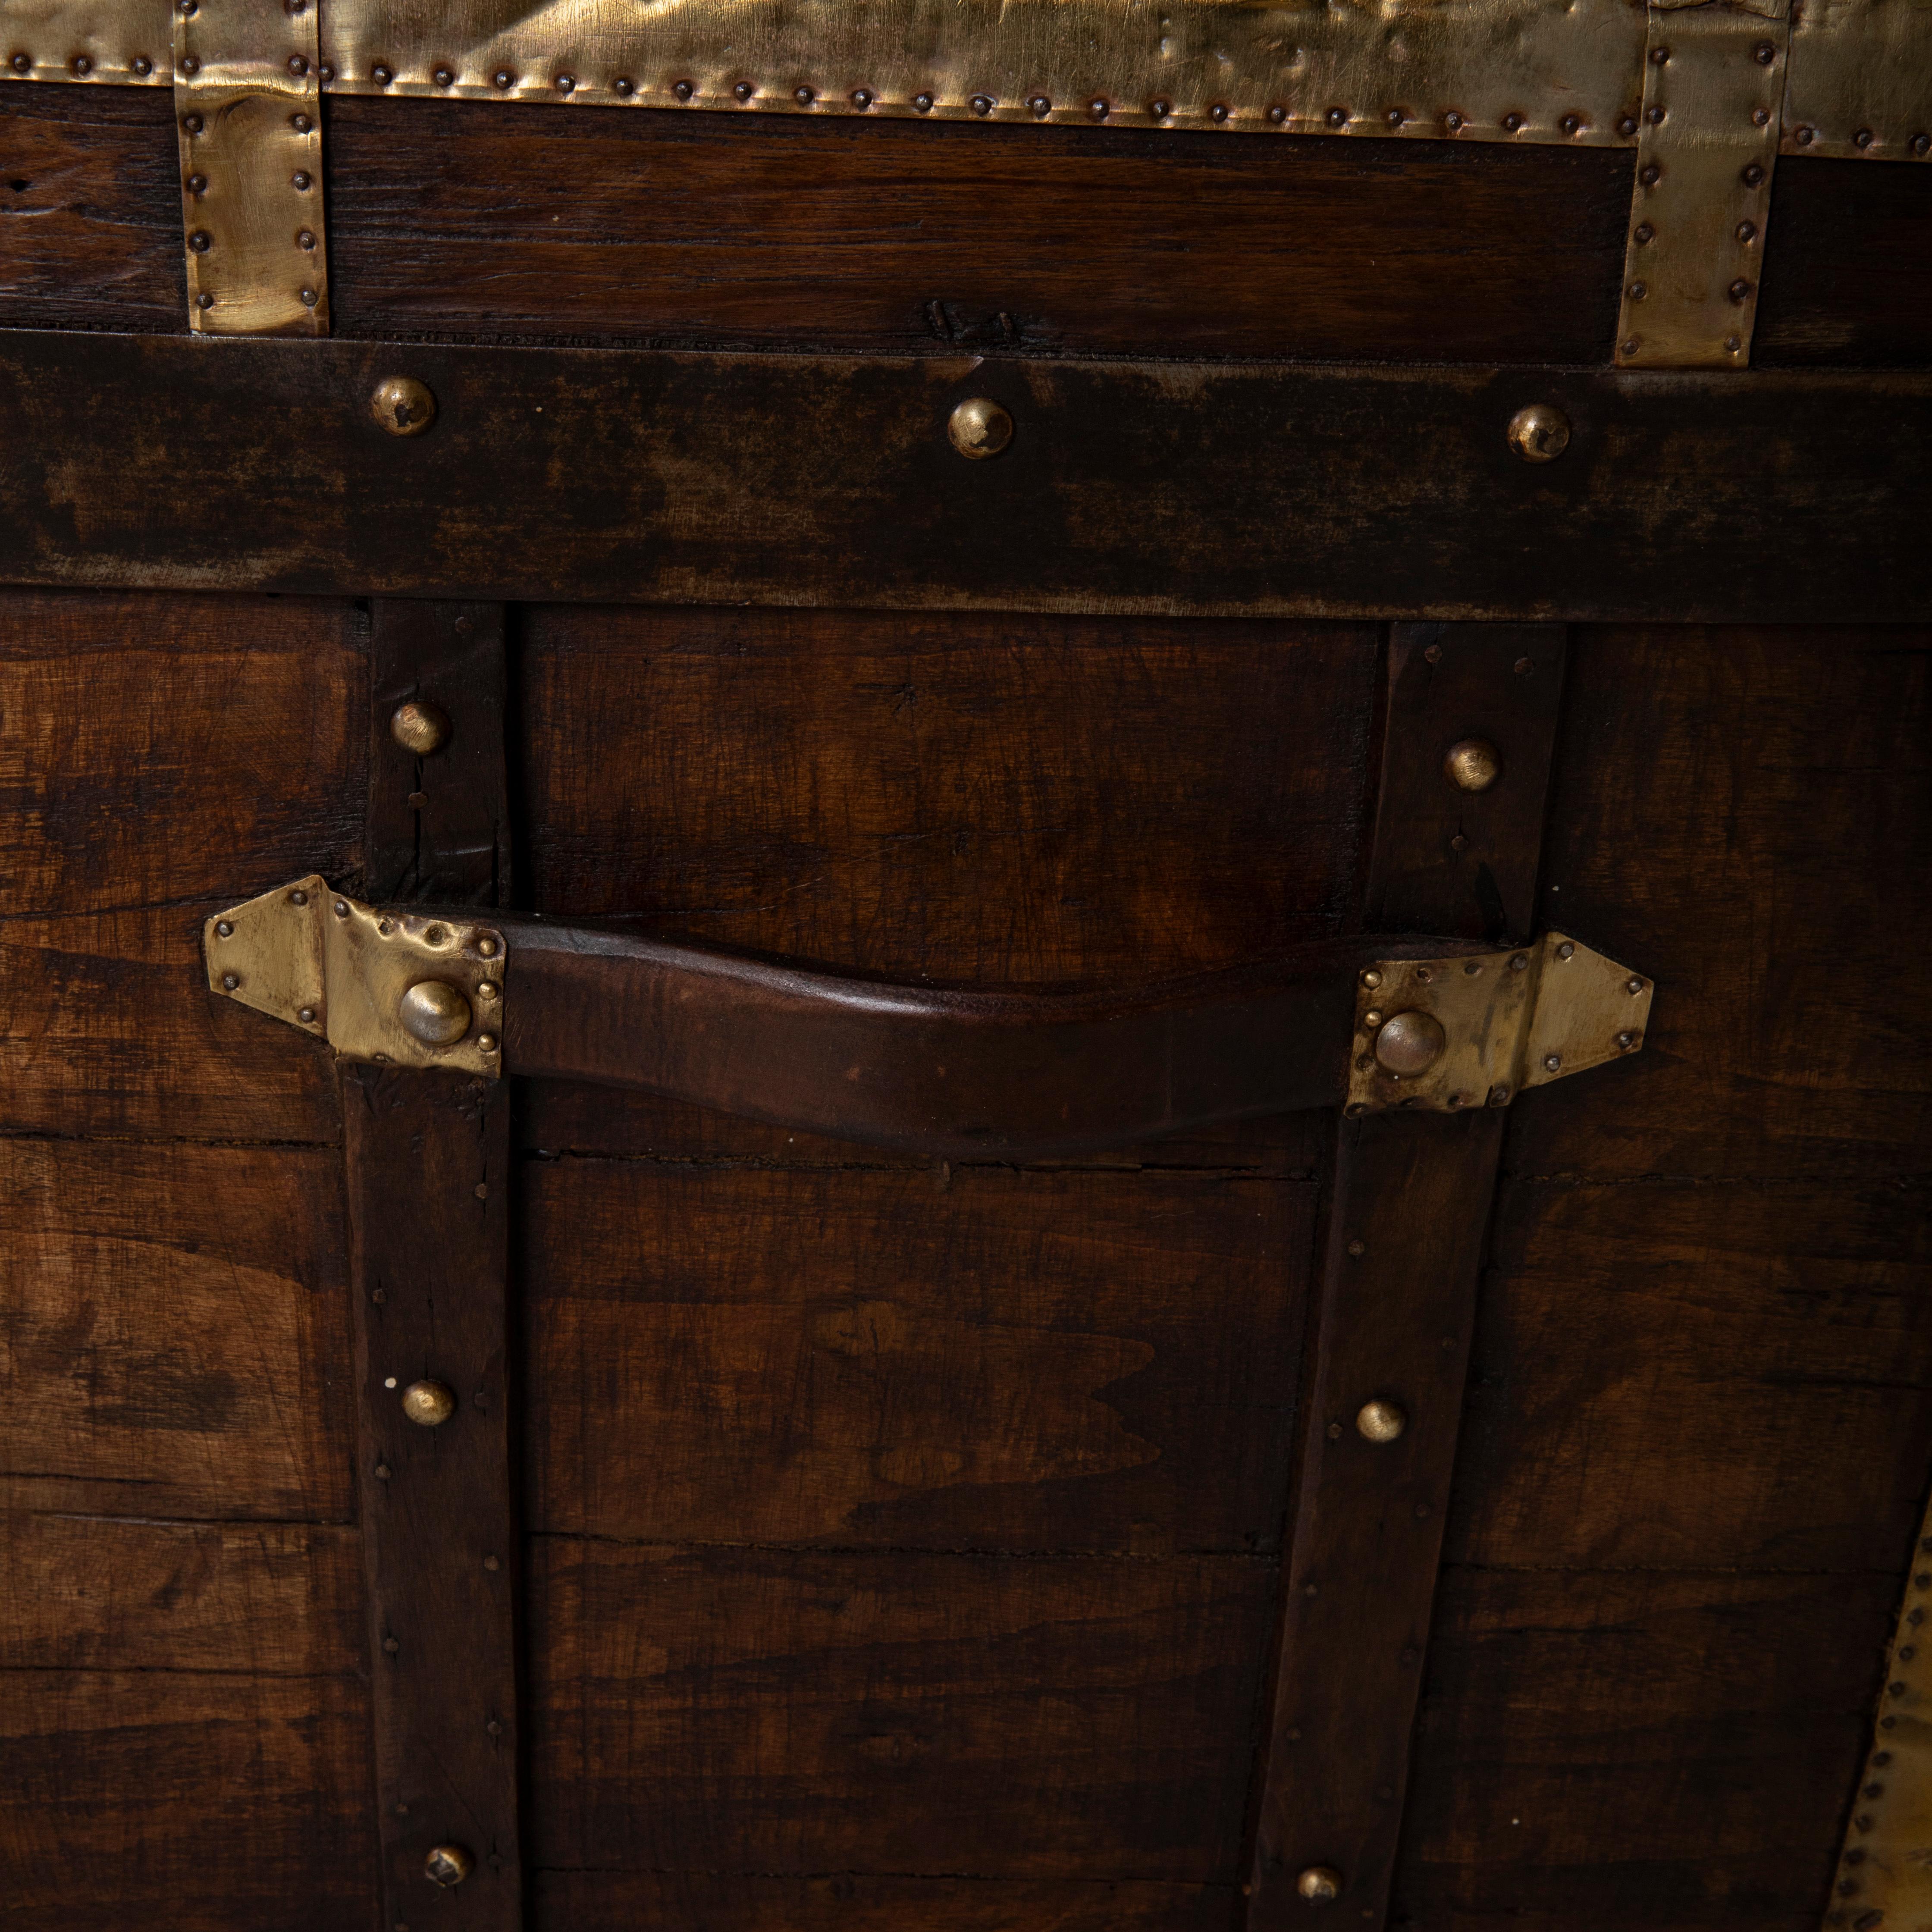 Swiss Wooden Steam Trunk with Runners, Brass, Iron, Leather Details, circa 1880 10